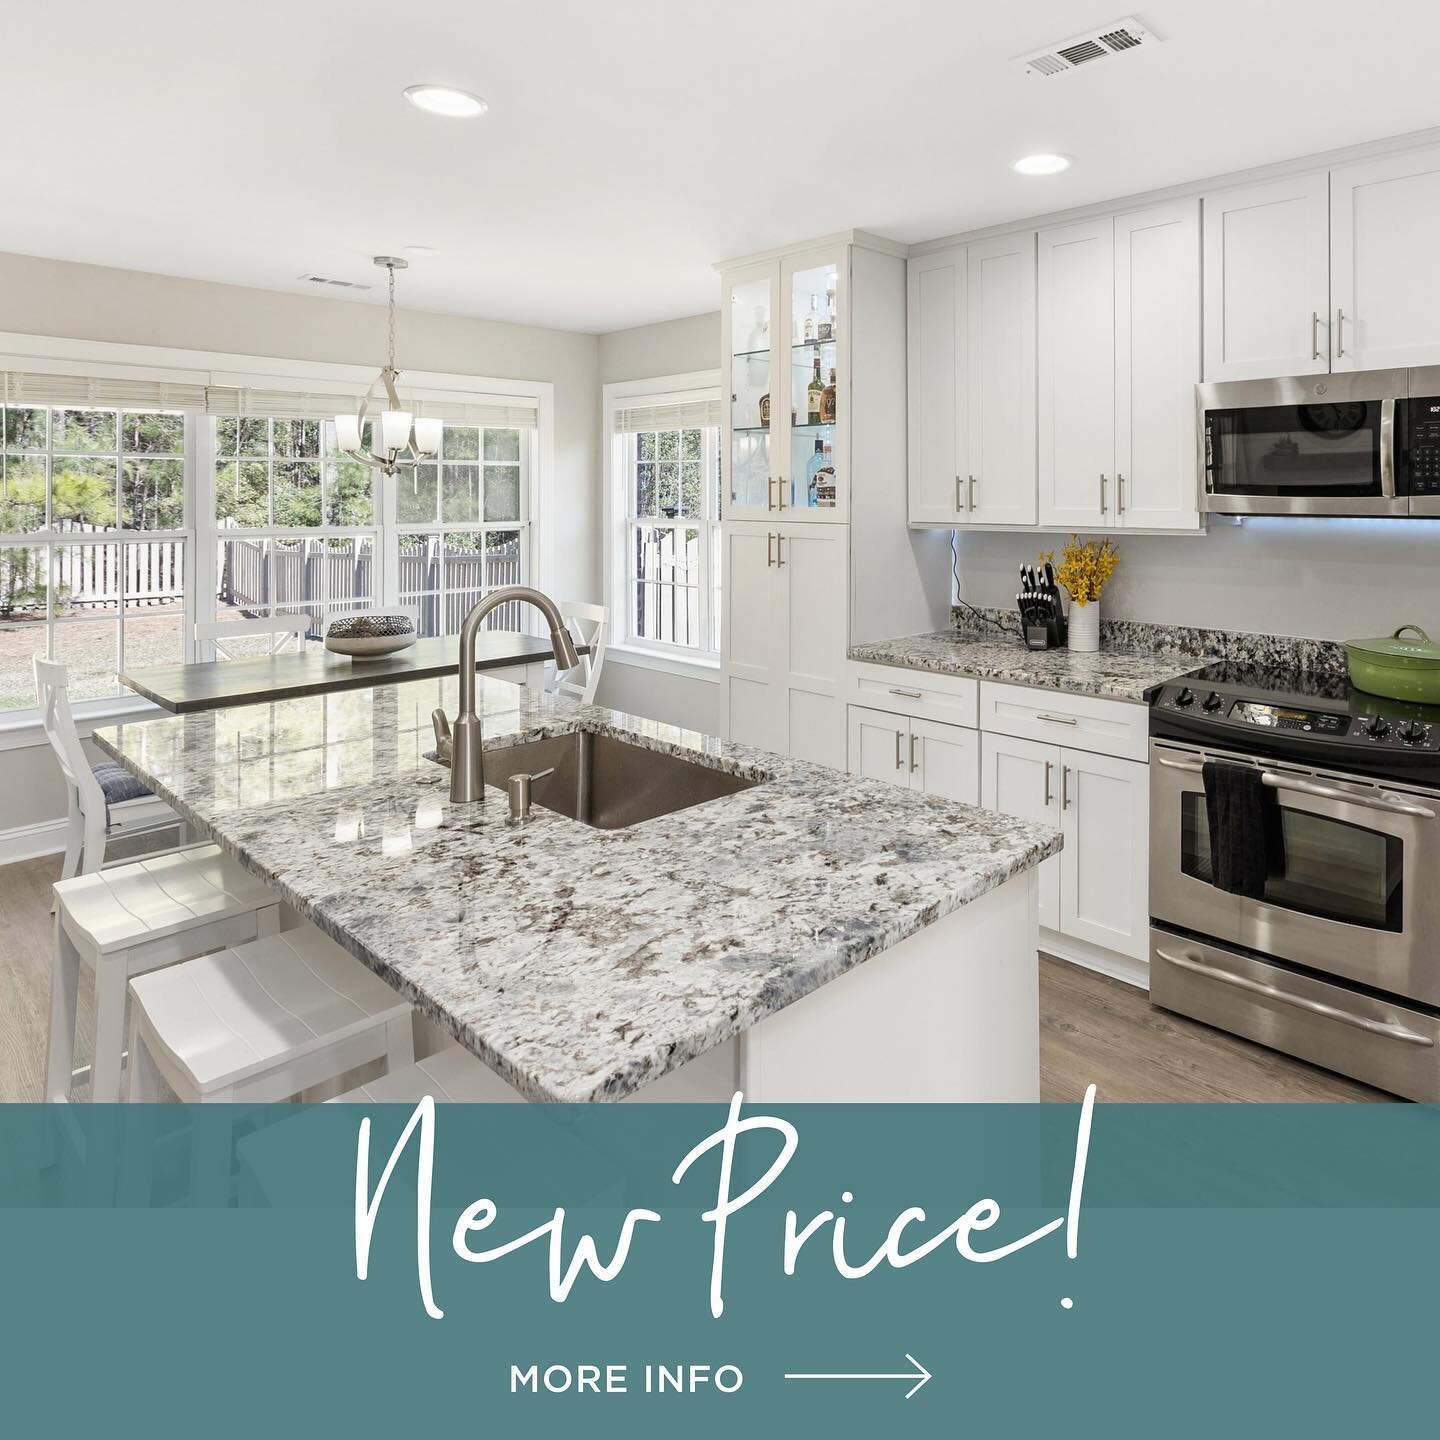 Incredible price reduction on this amazing Brunswick Forest home! Check it out and contact us for more details #brunswickforestrealestate #brunswickforest #capefearnational #leland